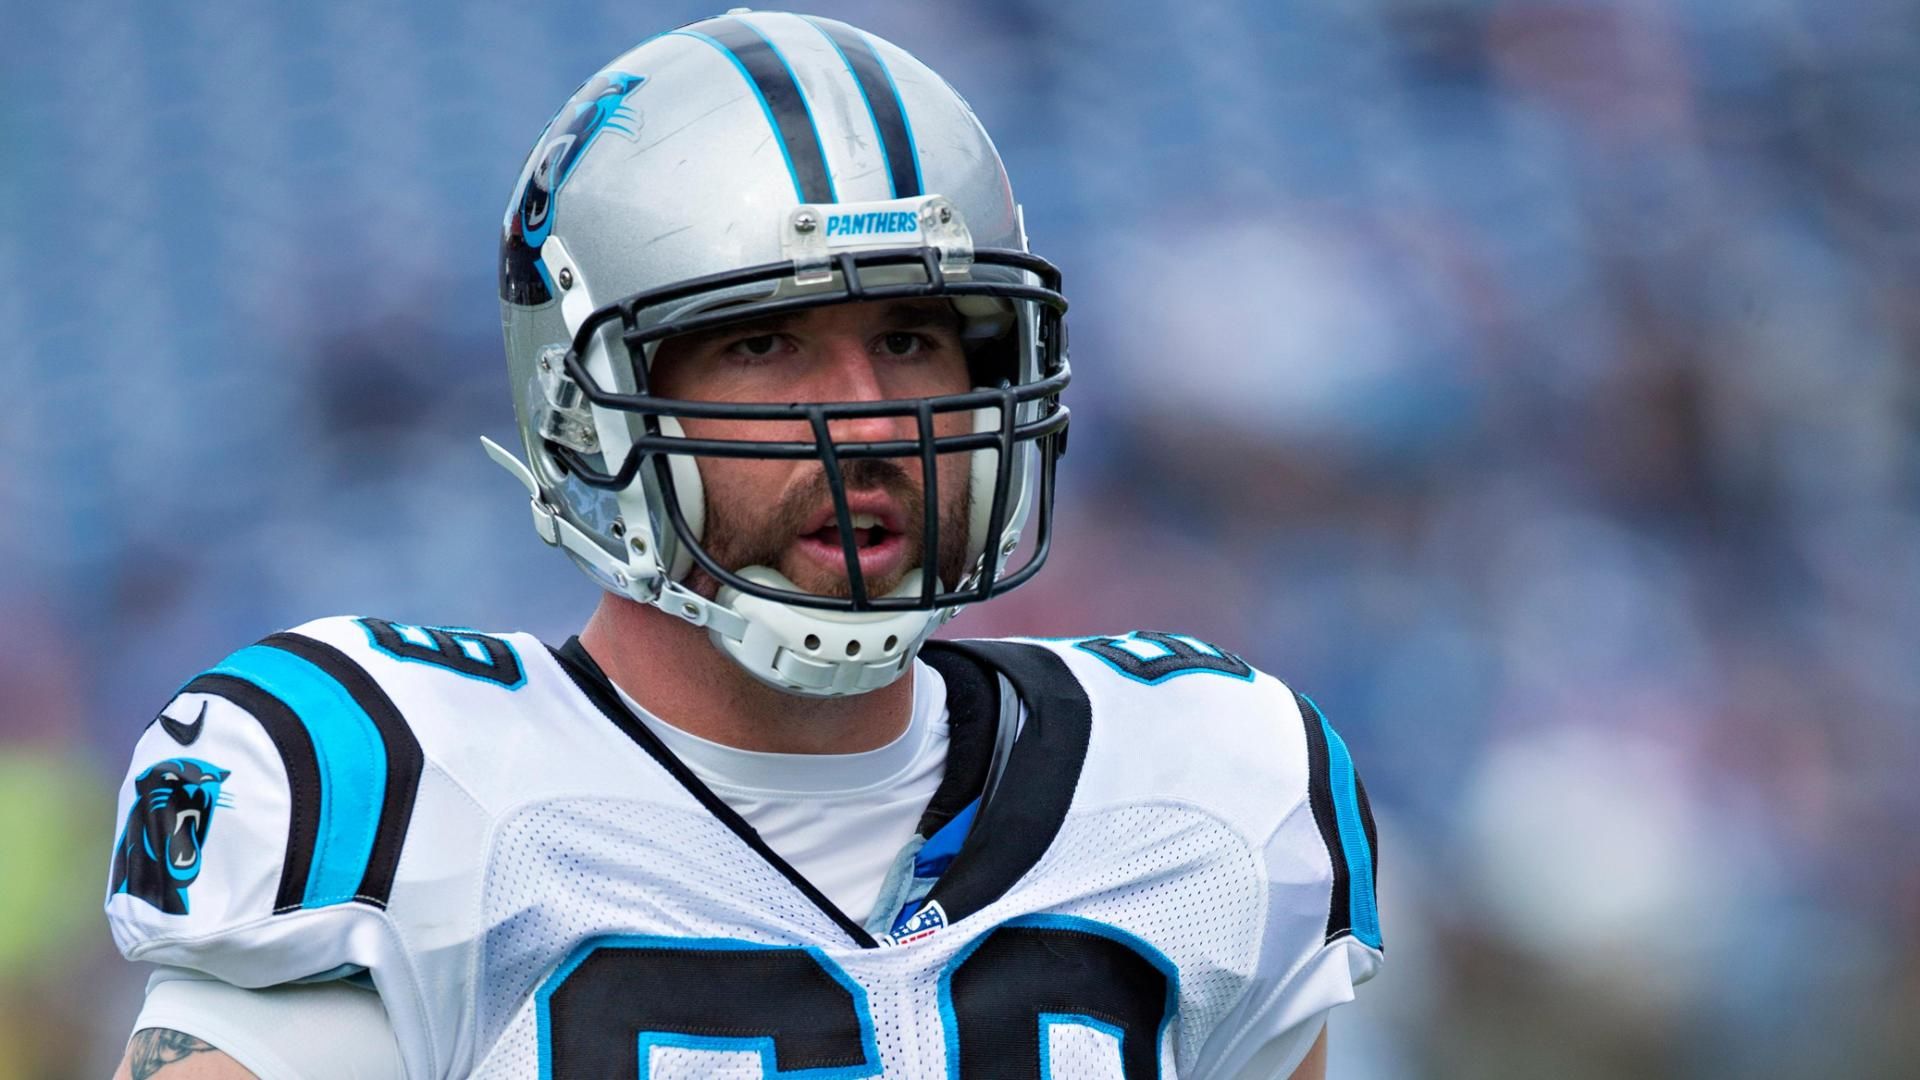 How much will the Panthers miss Jared Allen? ESPN Video